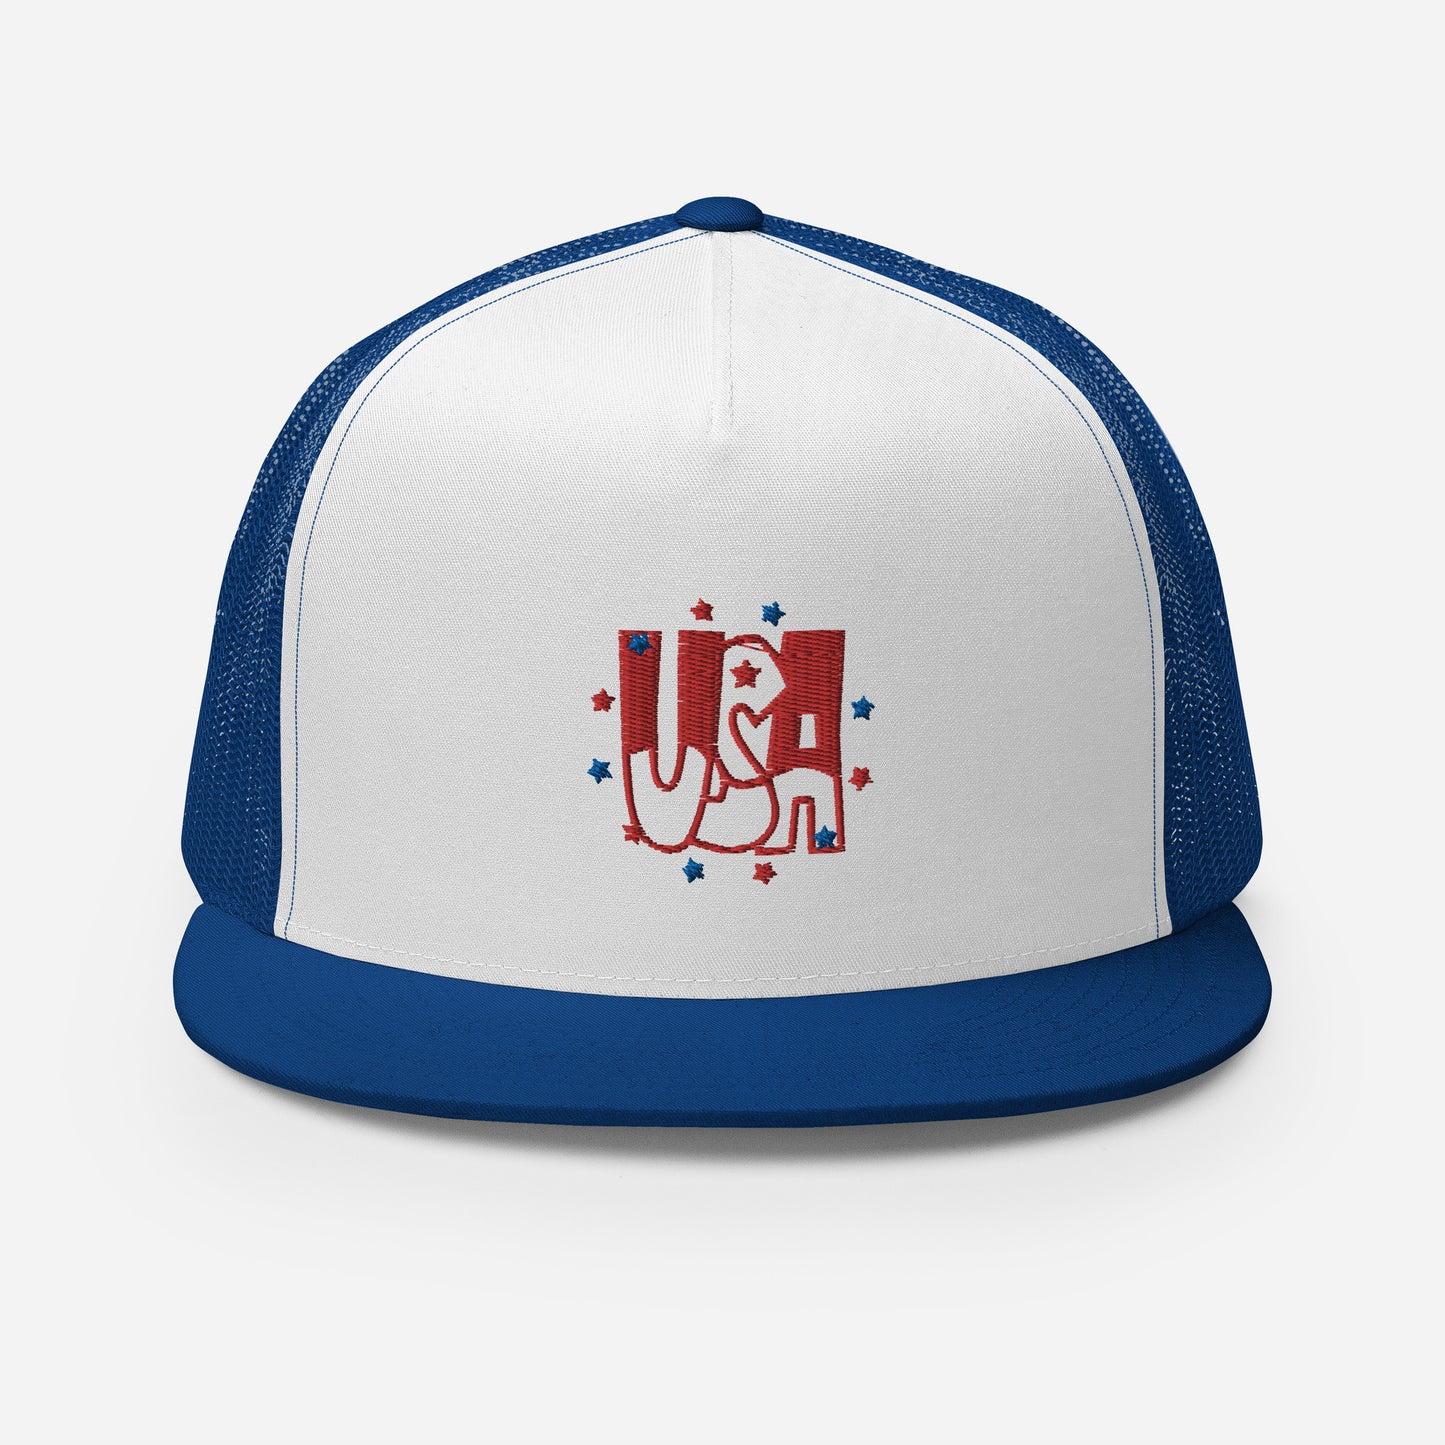 USA Embroidered Trucker Cap